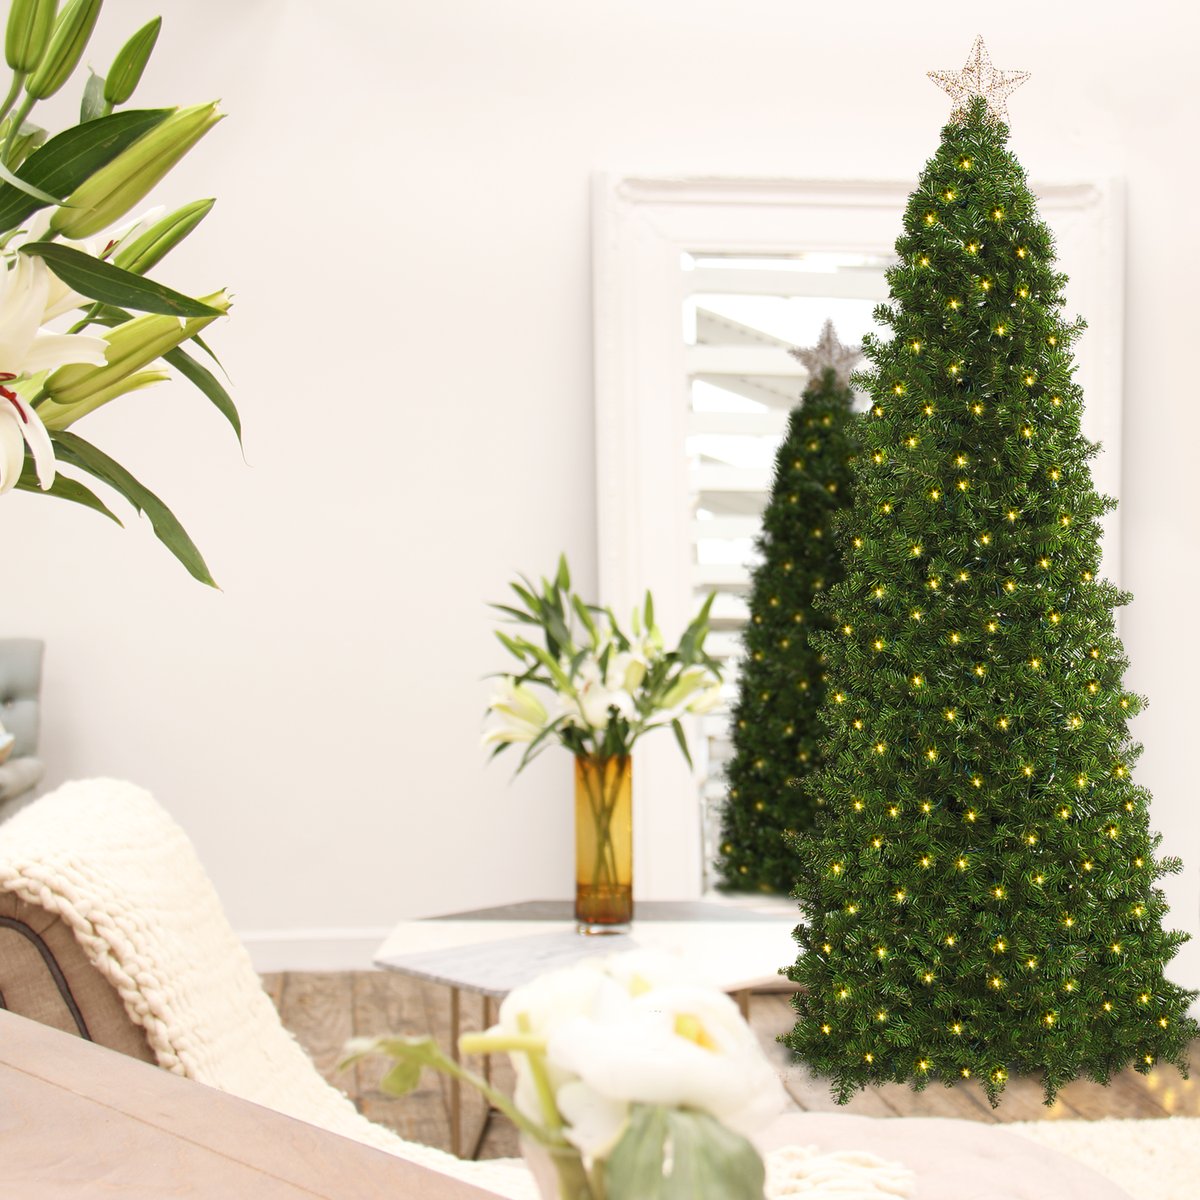 Christmas will always be as long as we stand heart to heart and hand in hand. Decorate your Pre-lit classic white lights Easy Treezy tree with your loved ones this holiday.   #easytreezy #easysetupchristmastree
 zcu.io/bDe8